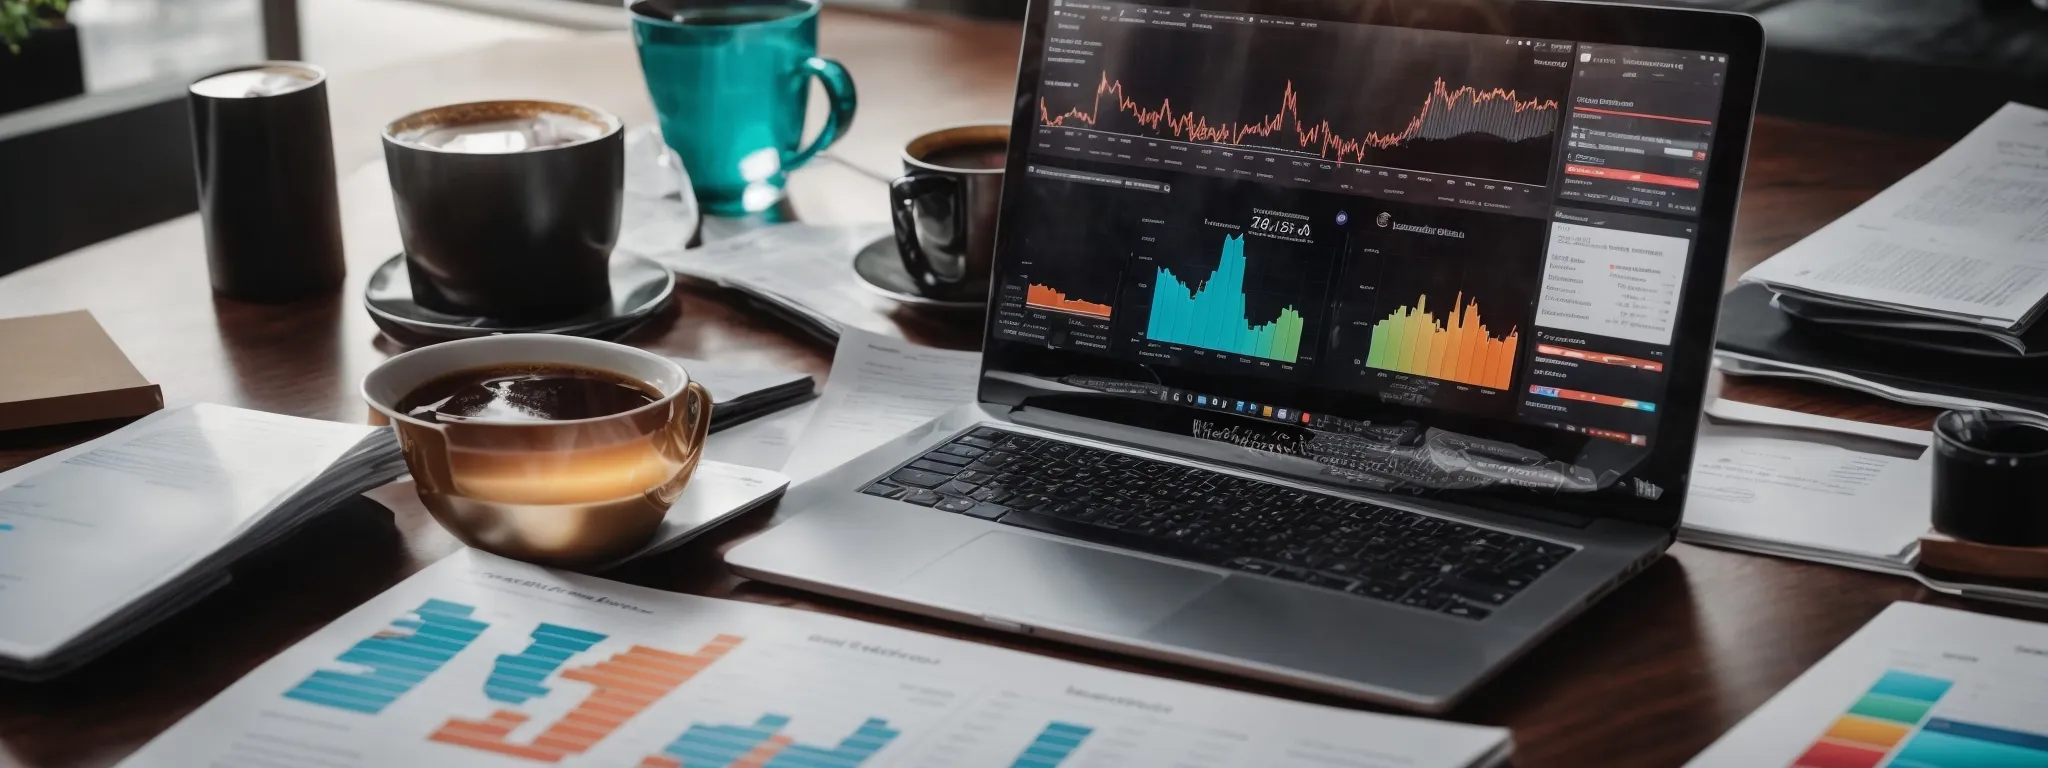 a laptop displaying vibrant analytics graphs is surrounded by marketing reports and a cup of coffee on a modern workspace, symbolizing strategic market analysis.